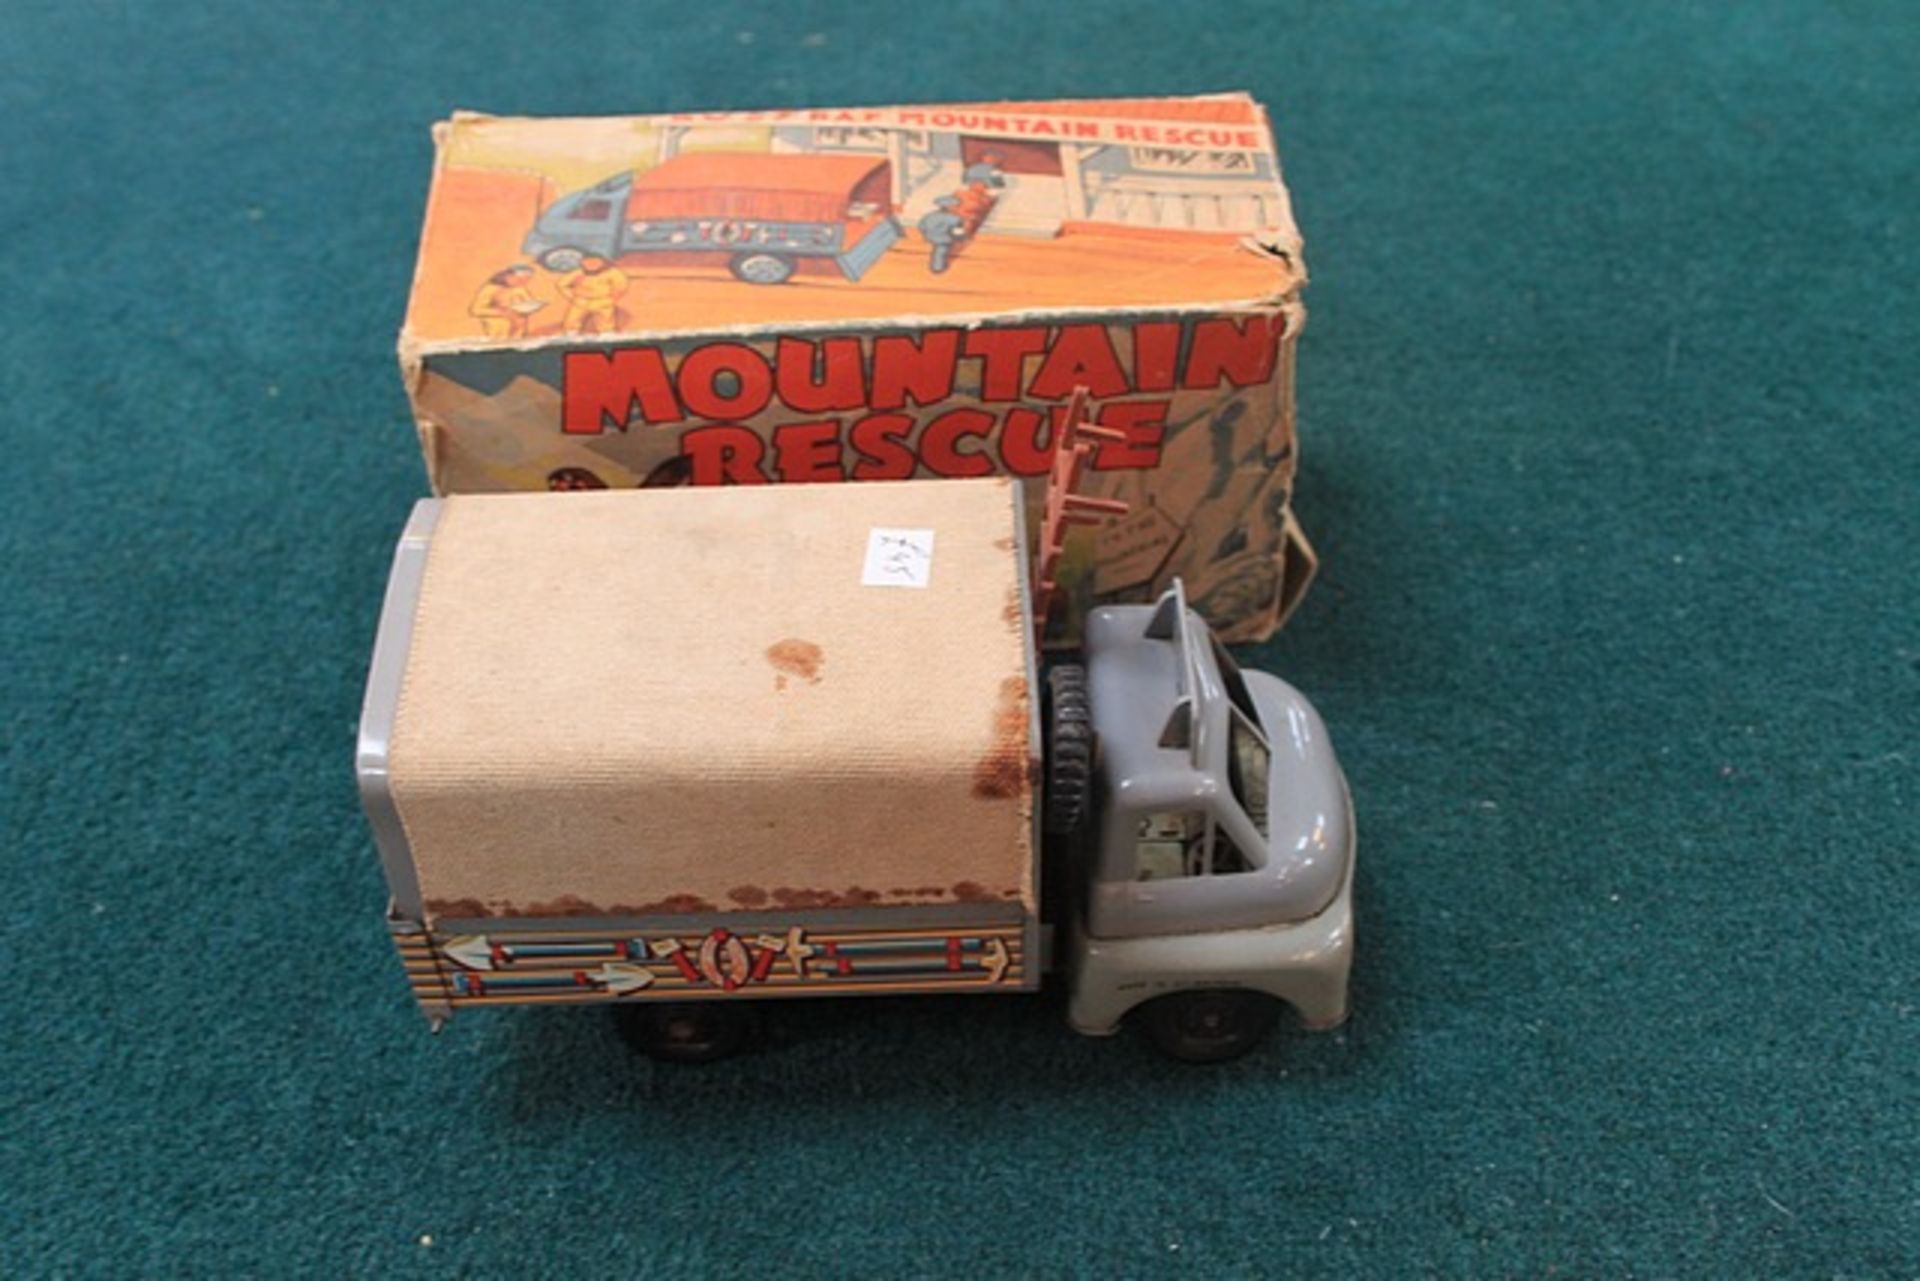 Welsotoys (Wells-Brimtoy) model 9/620 Mountain Rescue Truck Complete With Box (Box Is Damaged) - Image 2 of 3